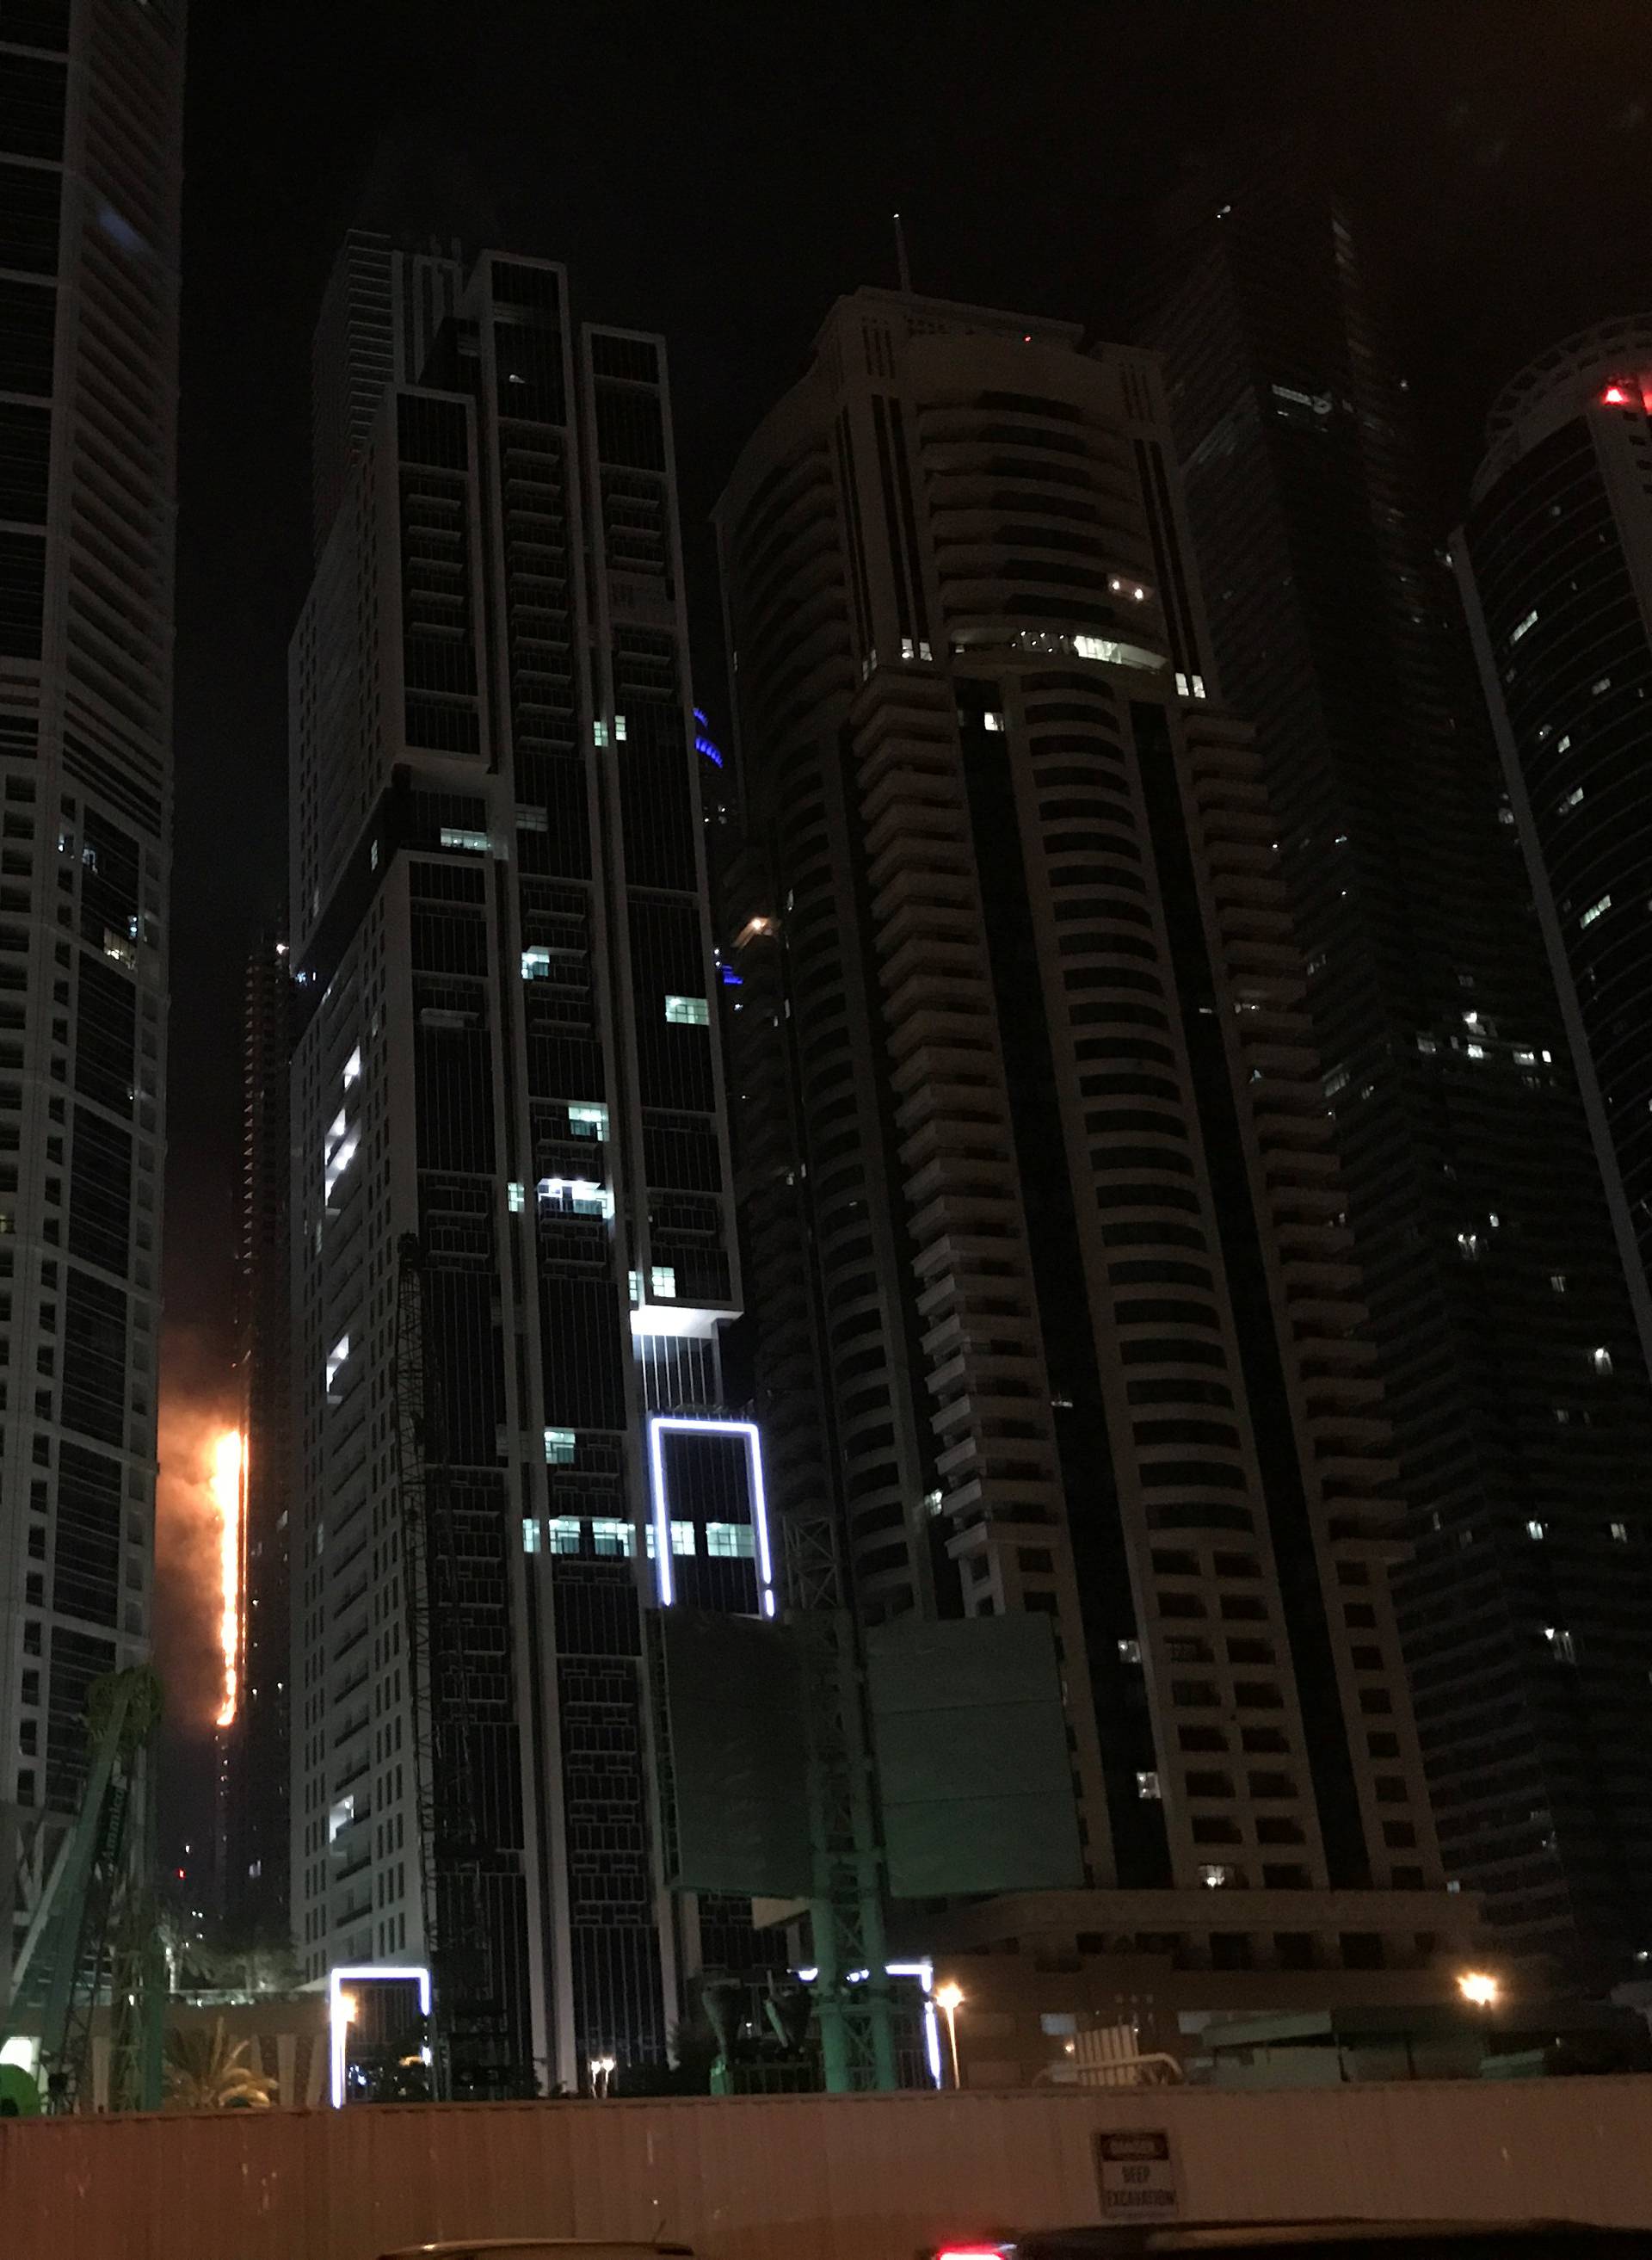 Flames shoot up the side of the Torch tower residential building in the Marina district, Dubai